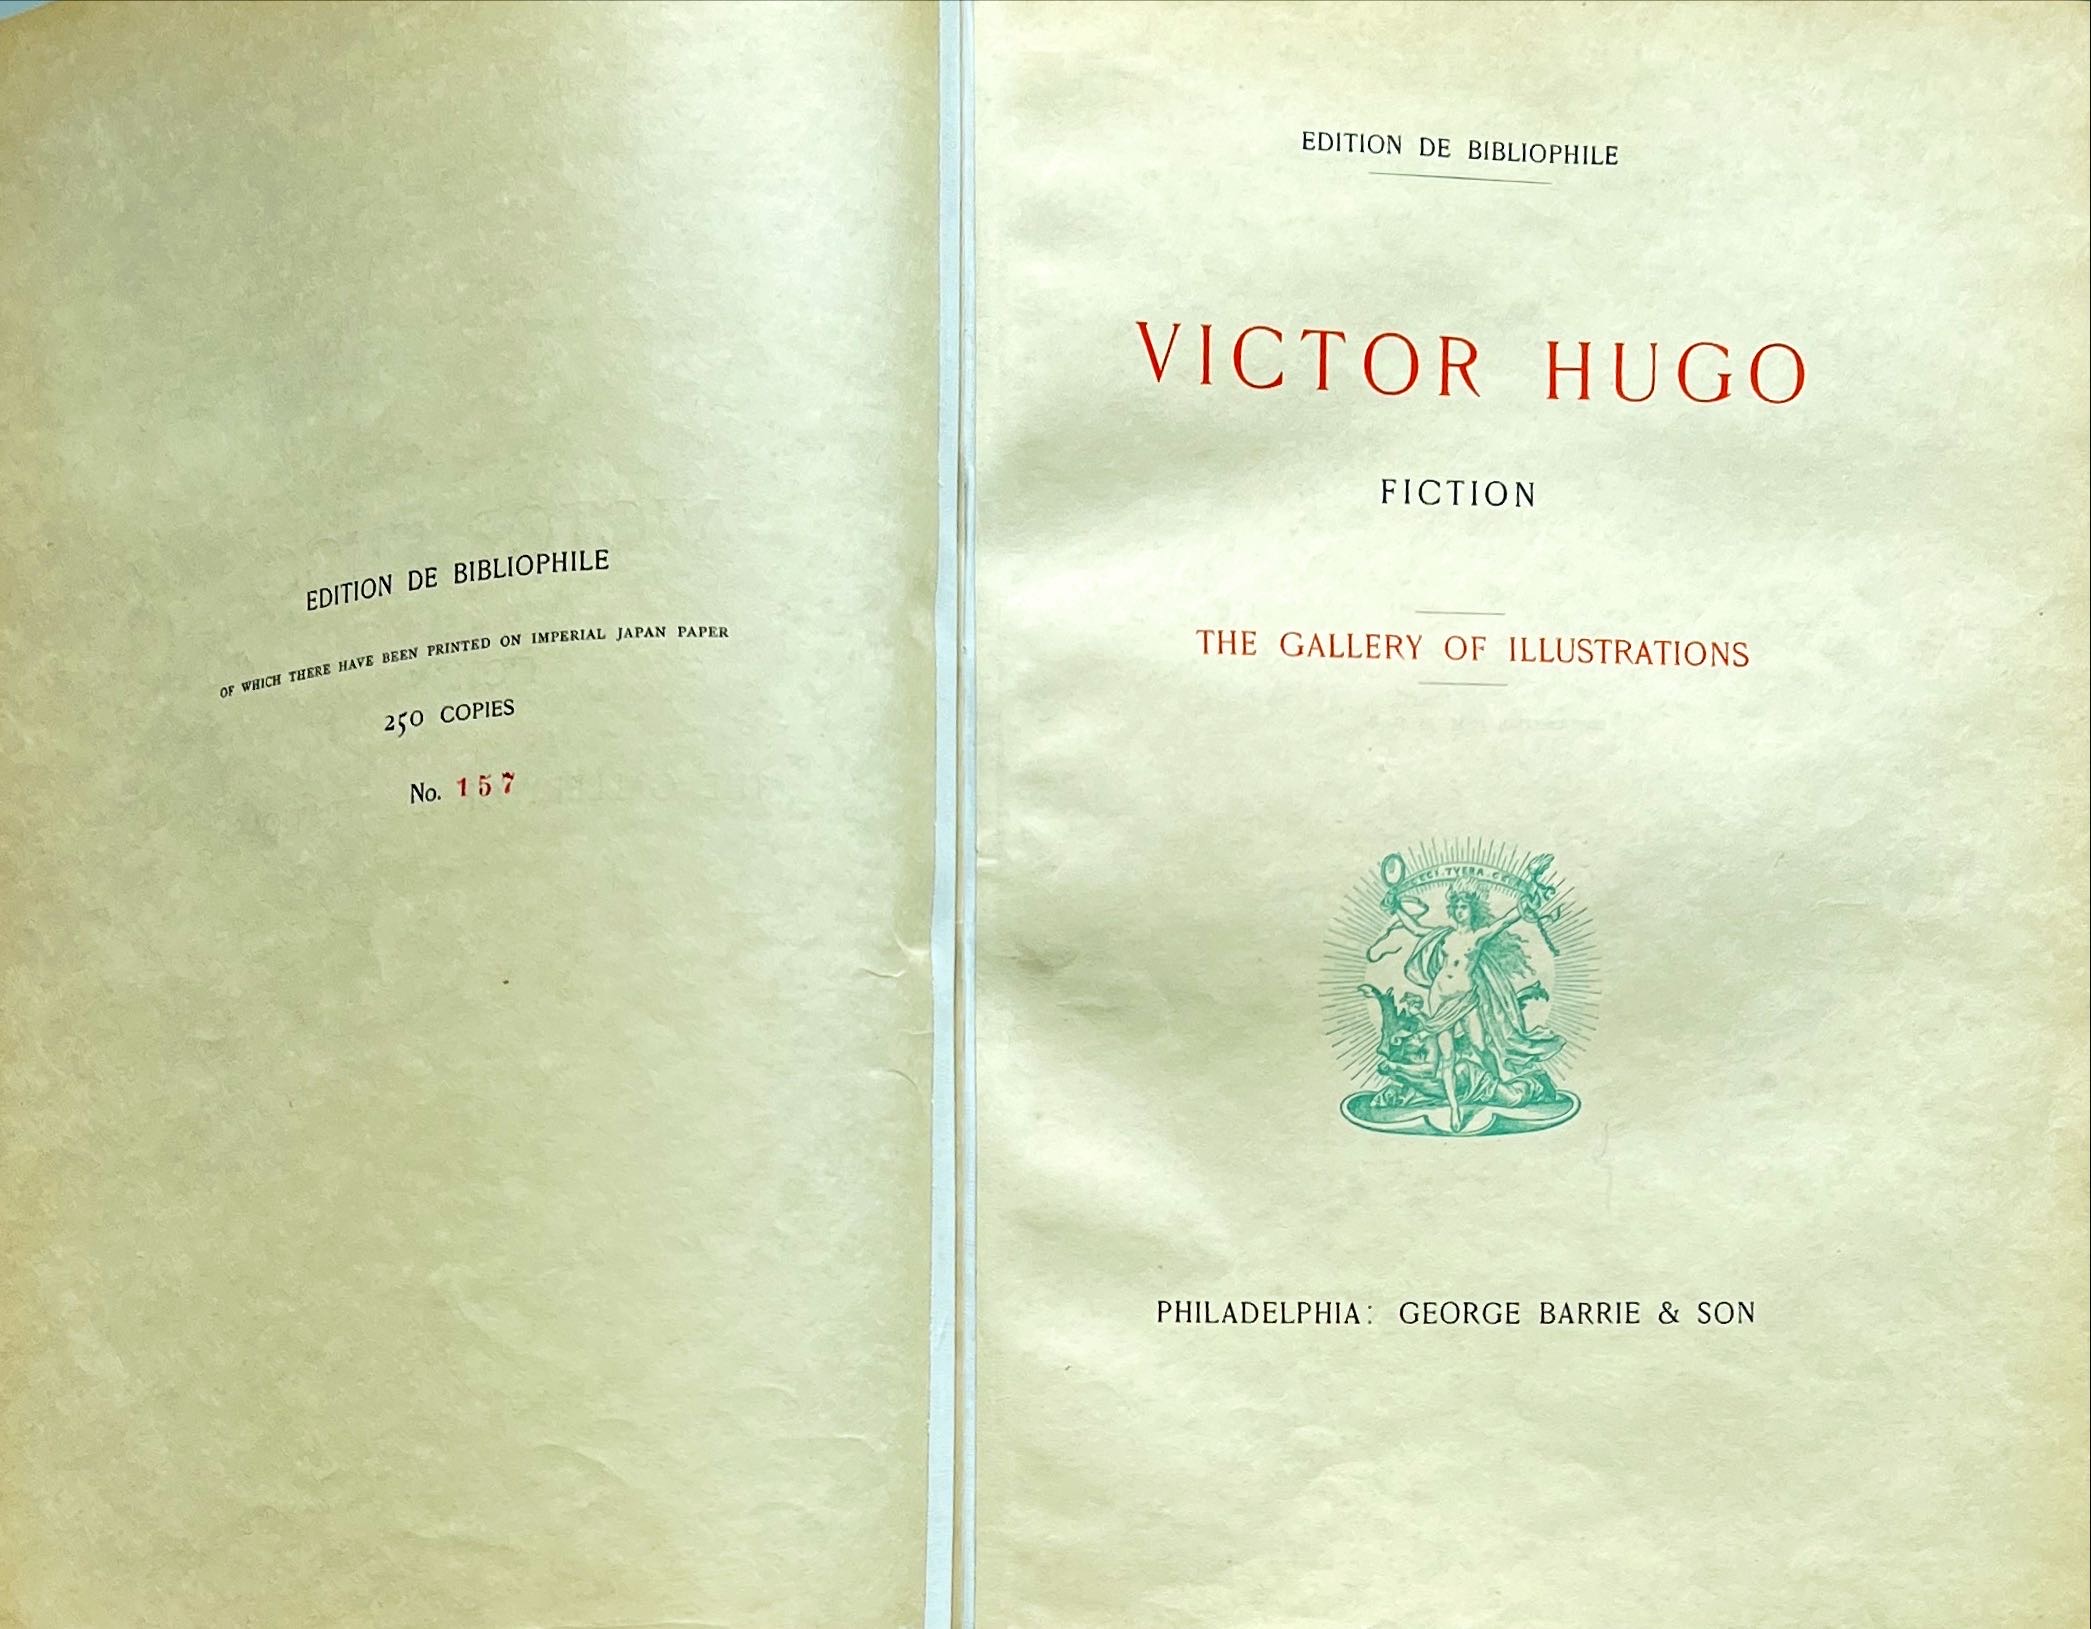 Victor Hugo. Fiction. The Gallery of Illustrations